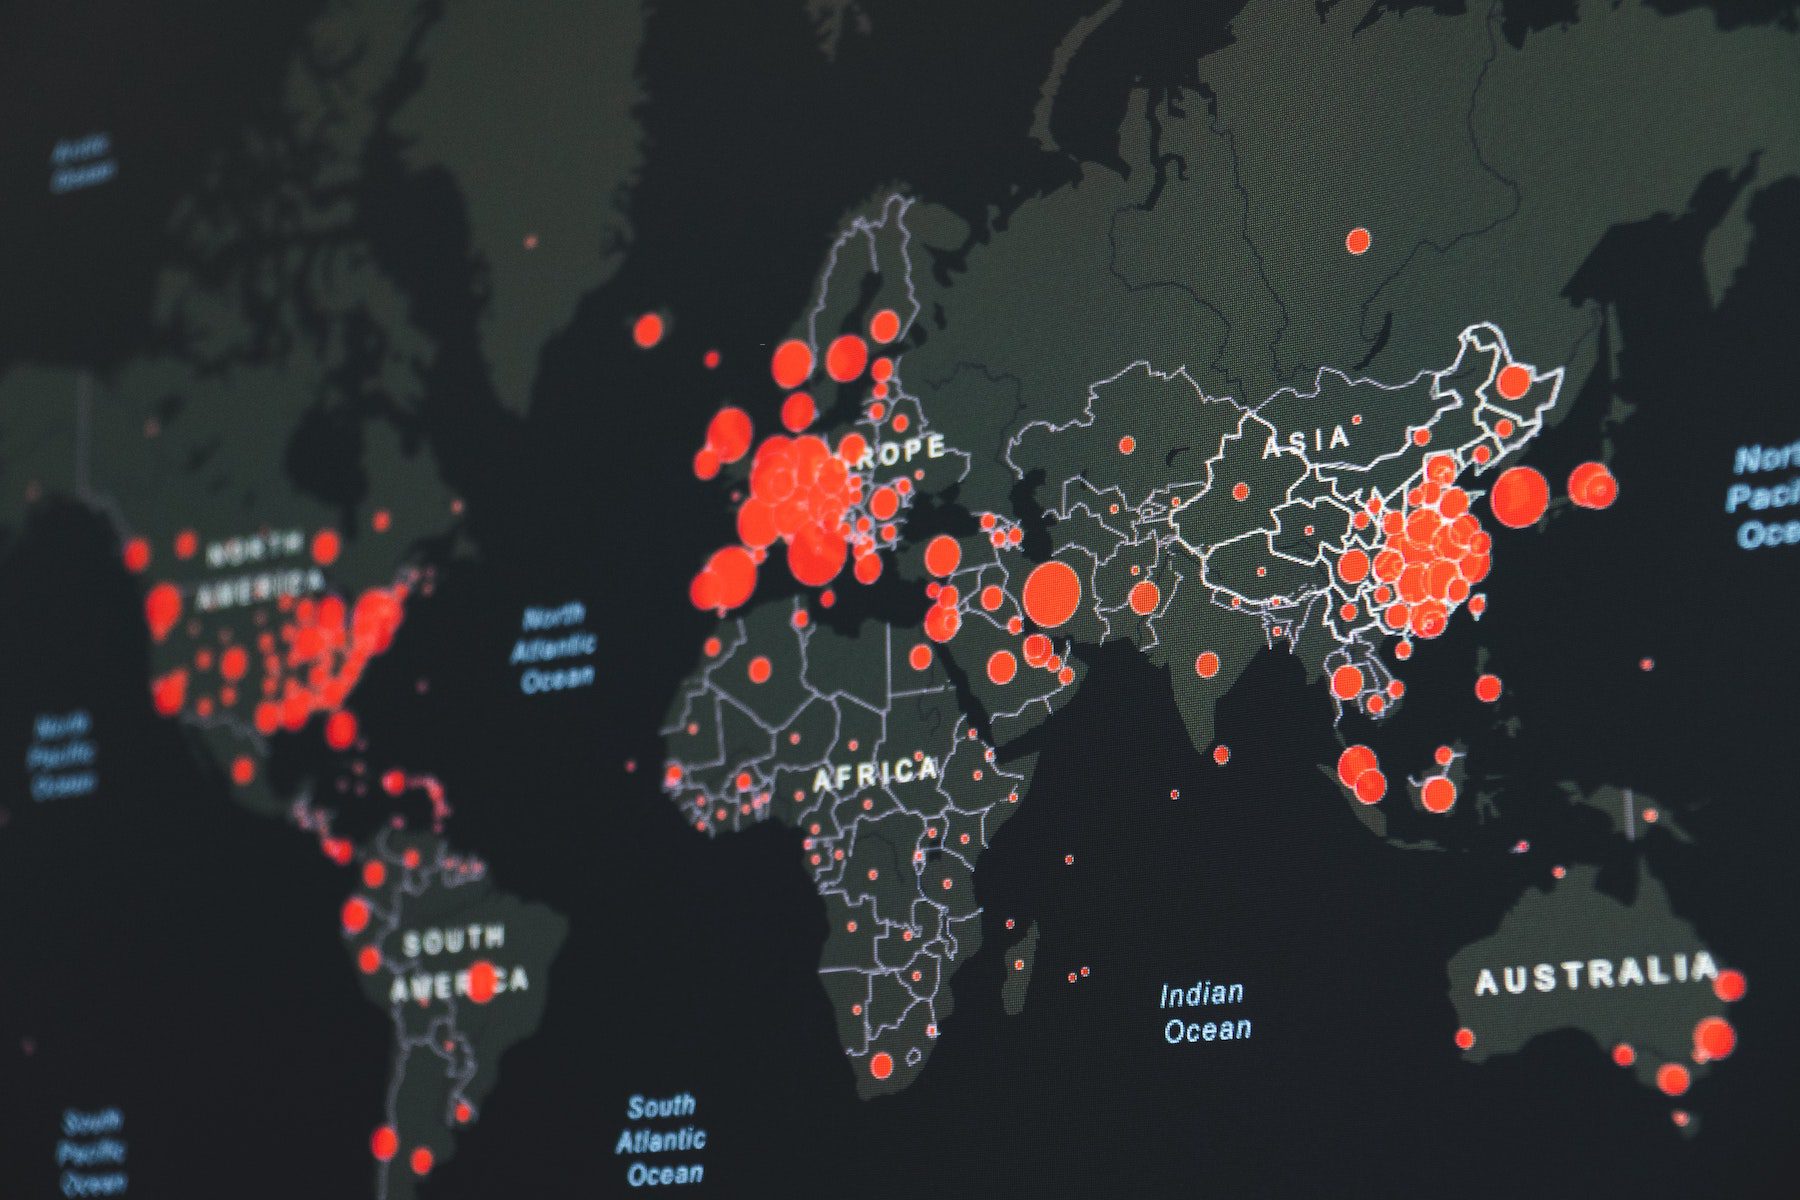 CDC illuminated map showing an outbreak across continents in black and red. 